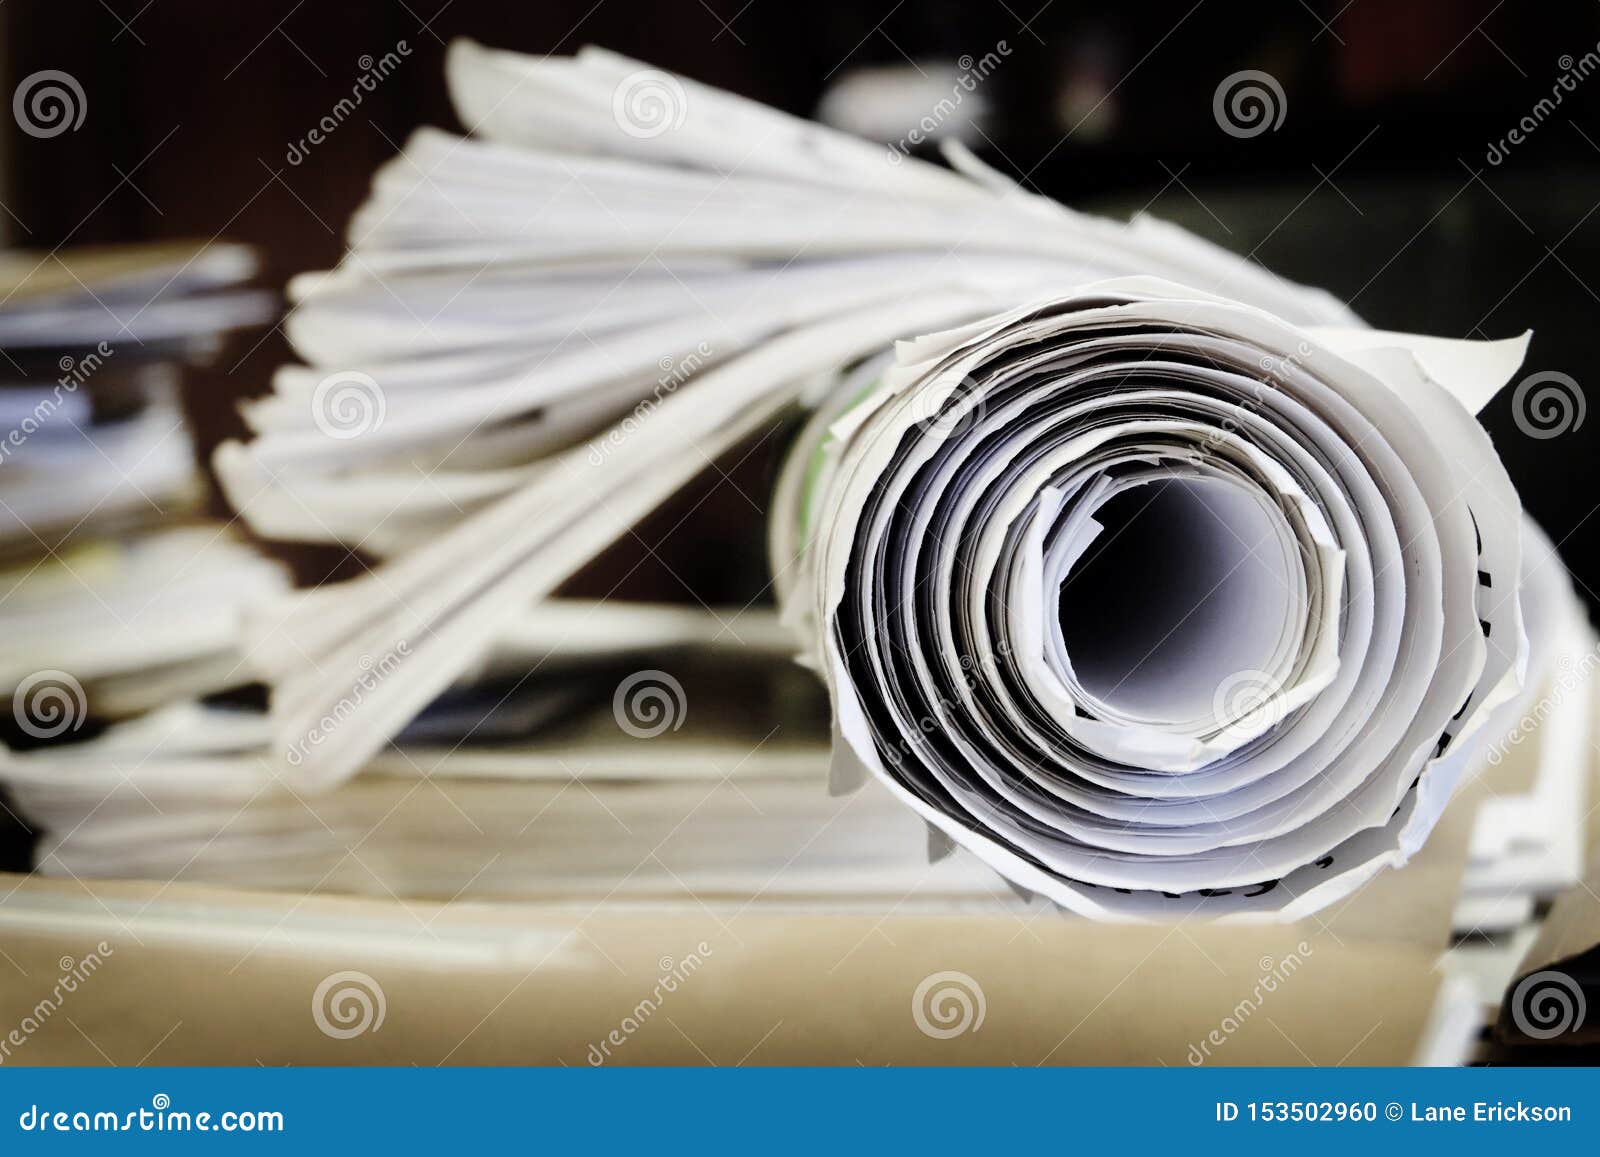 Roll Of Paper On Desk Blueprints Draft Stock Photo Image Of